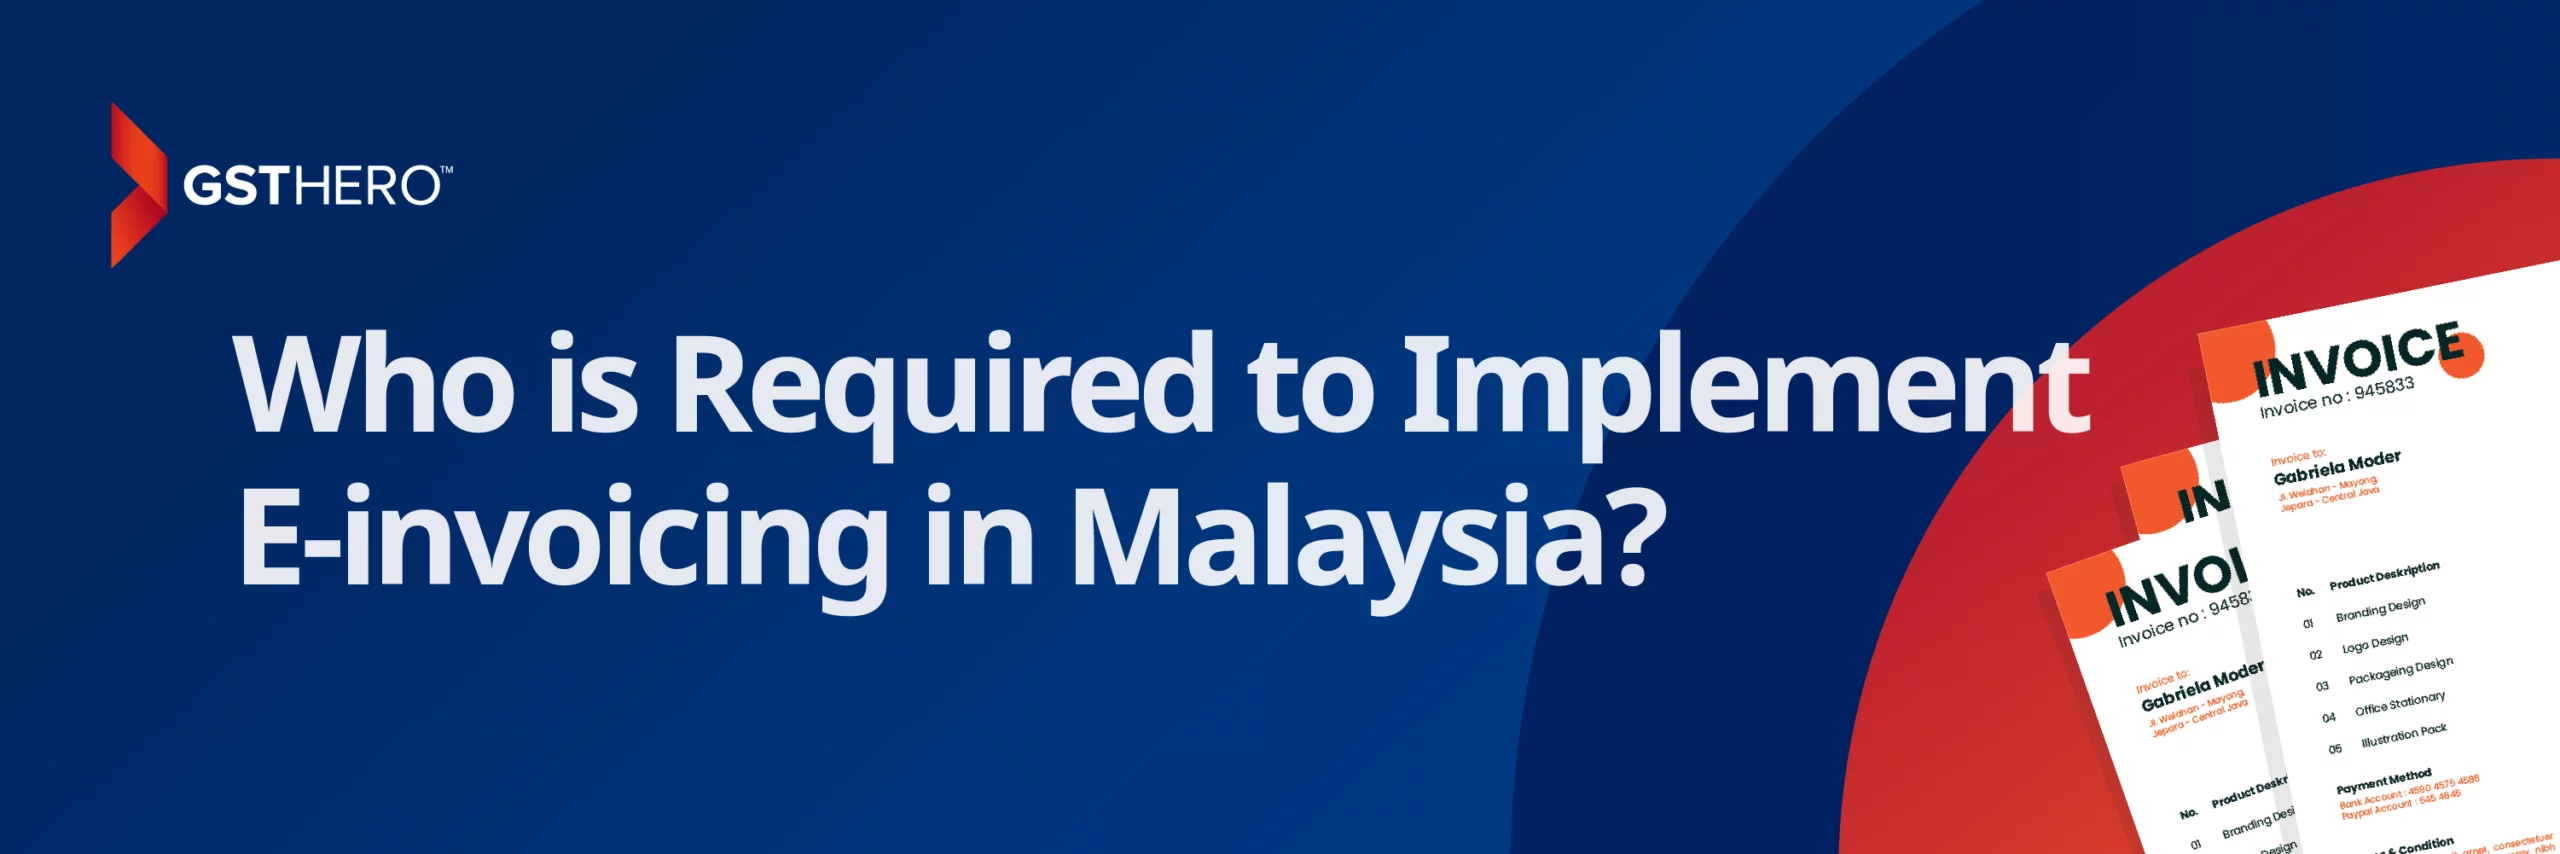 e-Invoicing Implementation in Malaysia